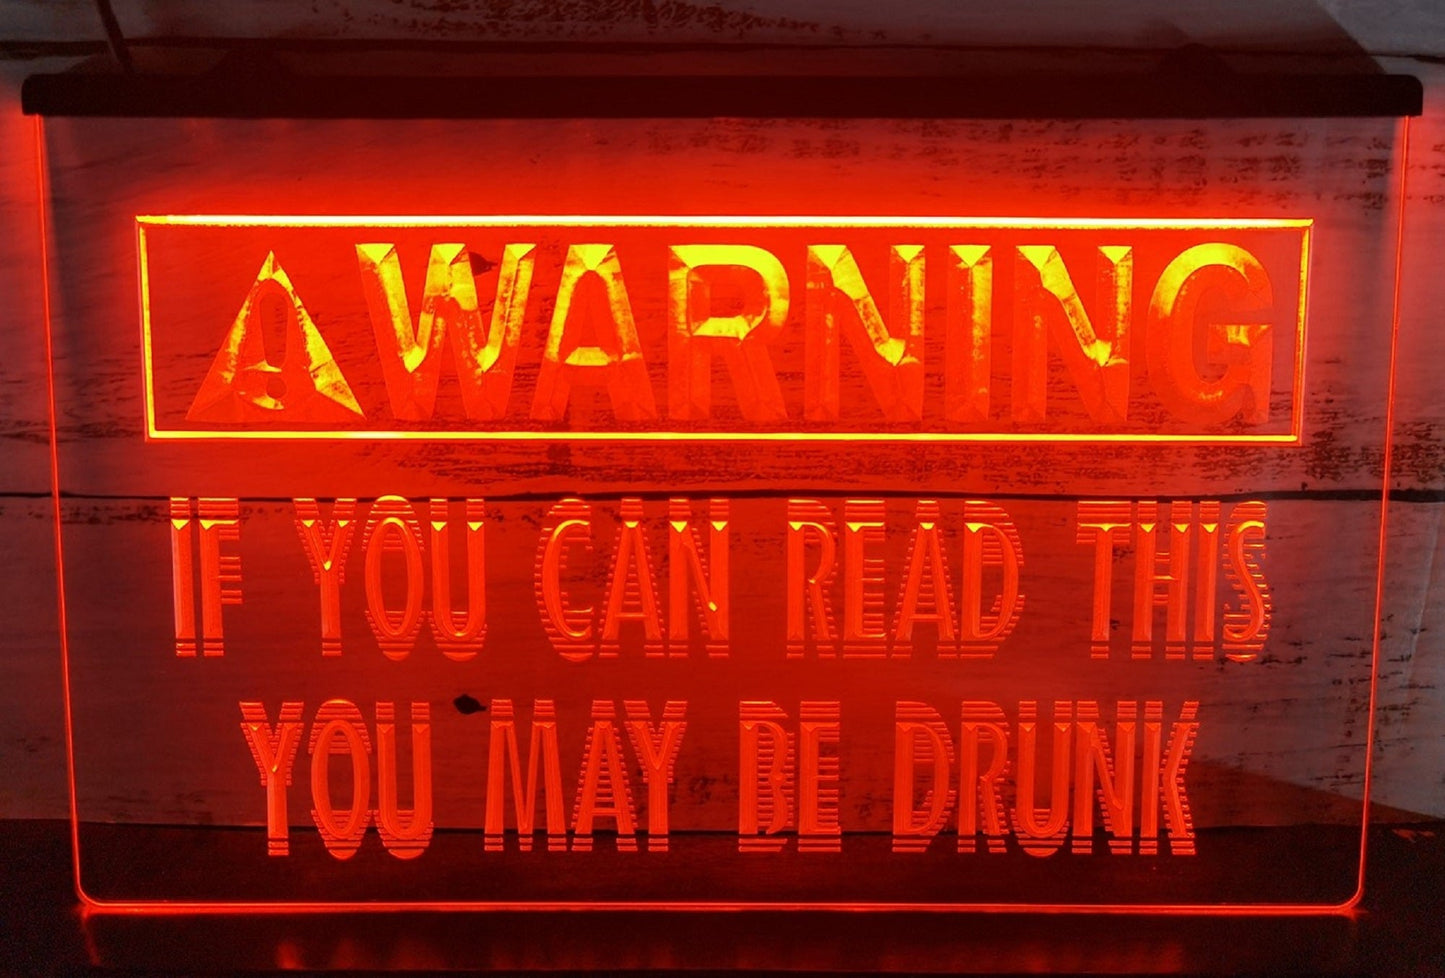 Neon Sign Warning If You Can Read This You May Be Drunk Wall Hanging Desk Table Top Decor